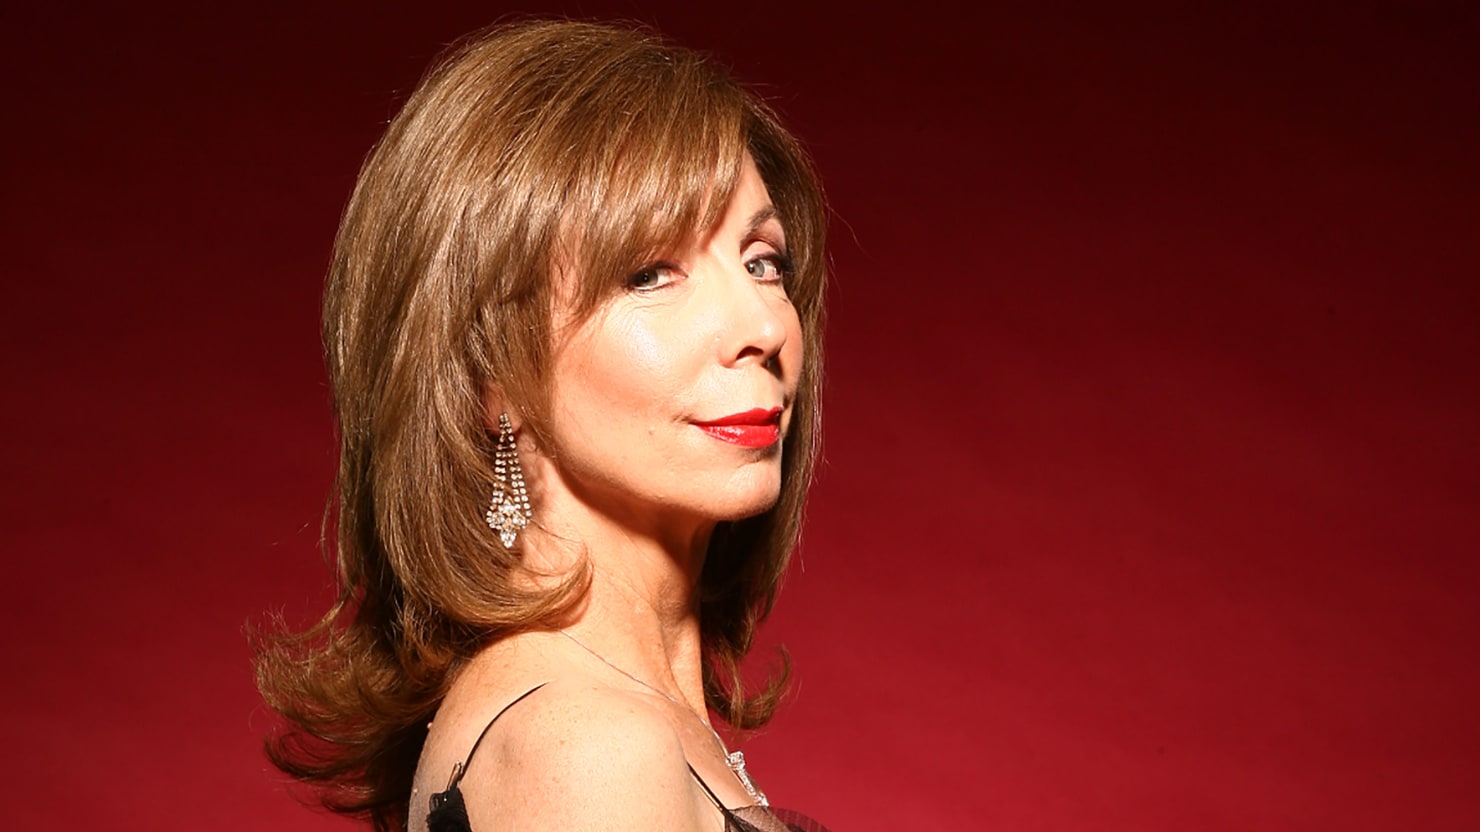 Rita Rudner On Getting 'Cut' By Bob Fosse, Finding Her Comedy Voi...